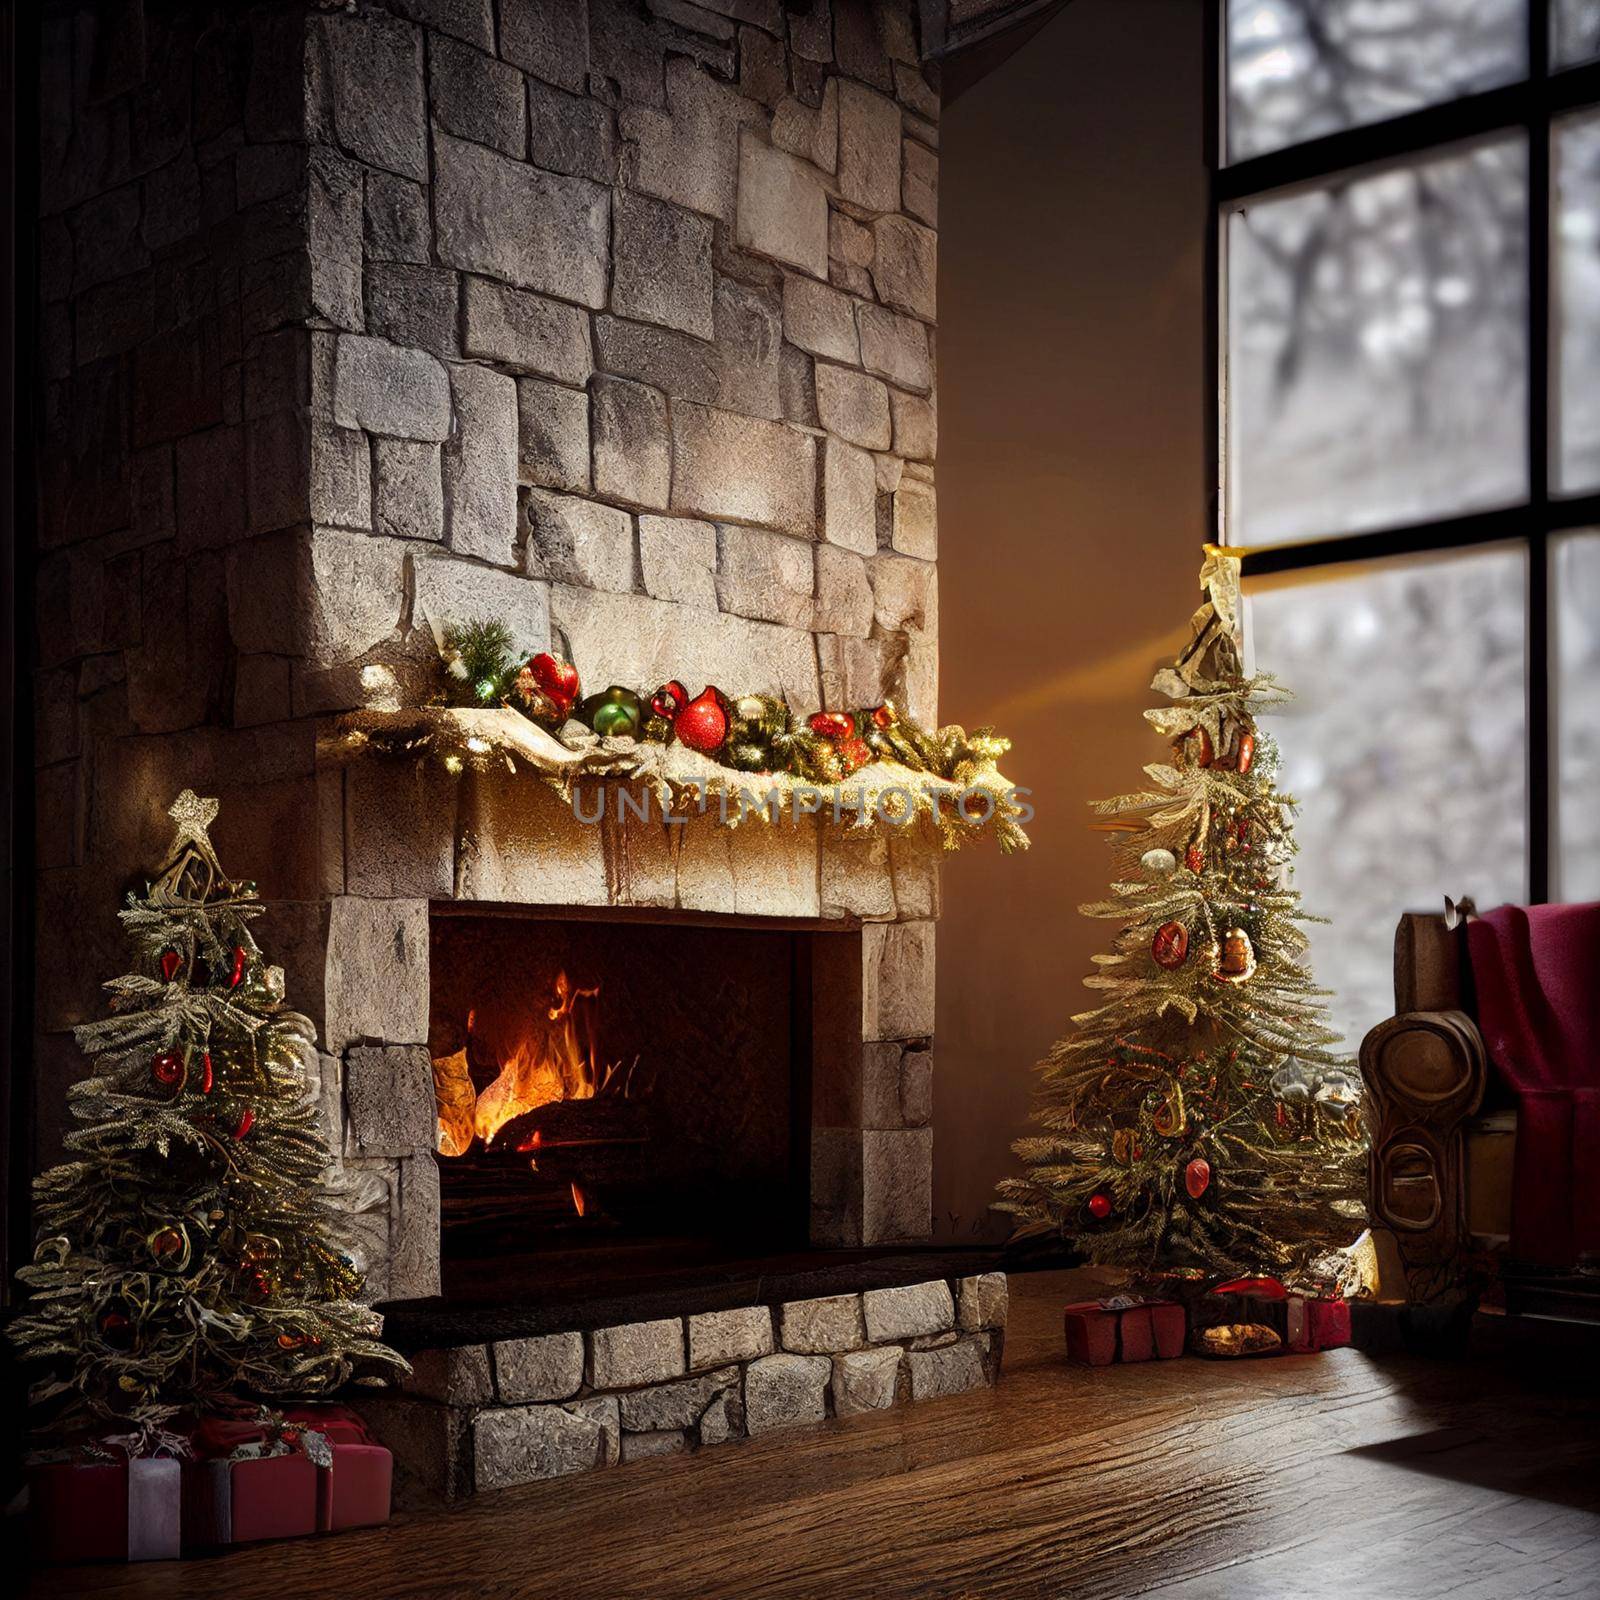 Stone fireplace decorated for Christmas by NeuroSky